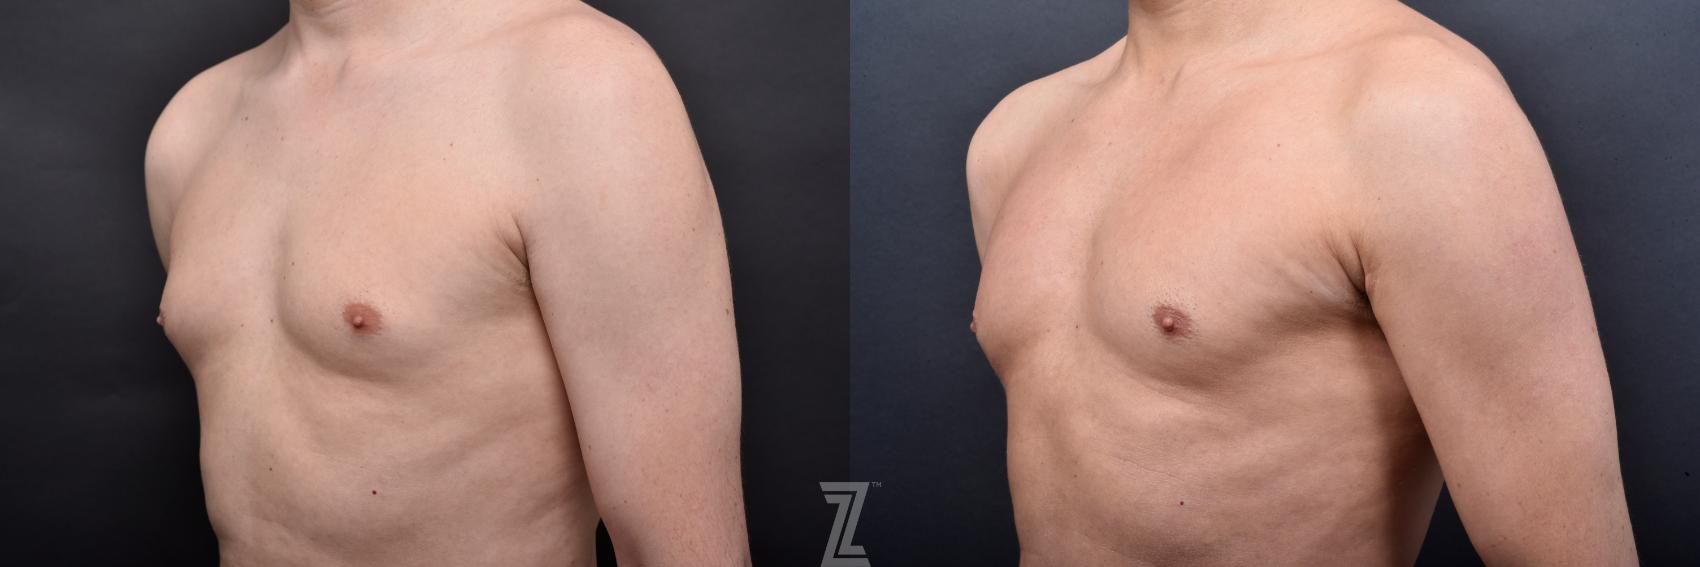 Liposuction Before & After Photo | Austin, TX | The Piazza Center for Plastic Surgery & Advanced Skin Care